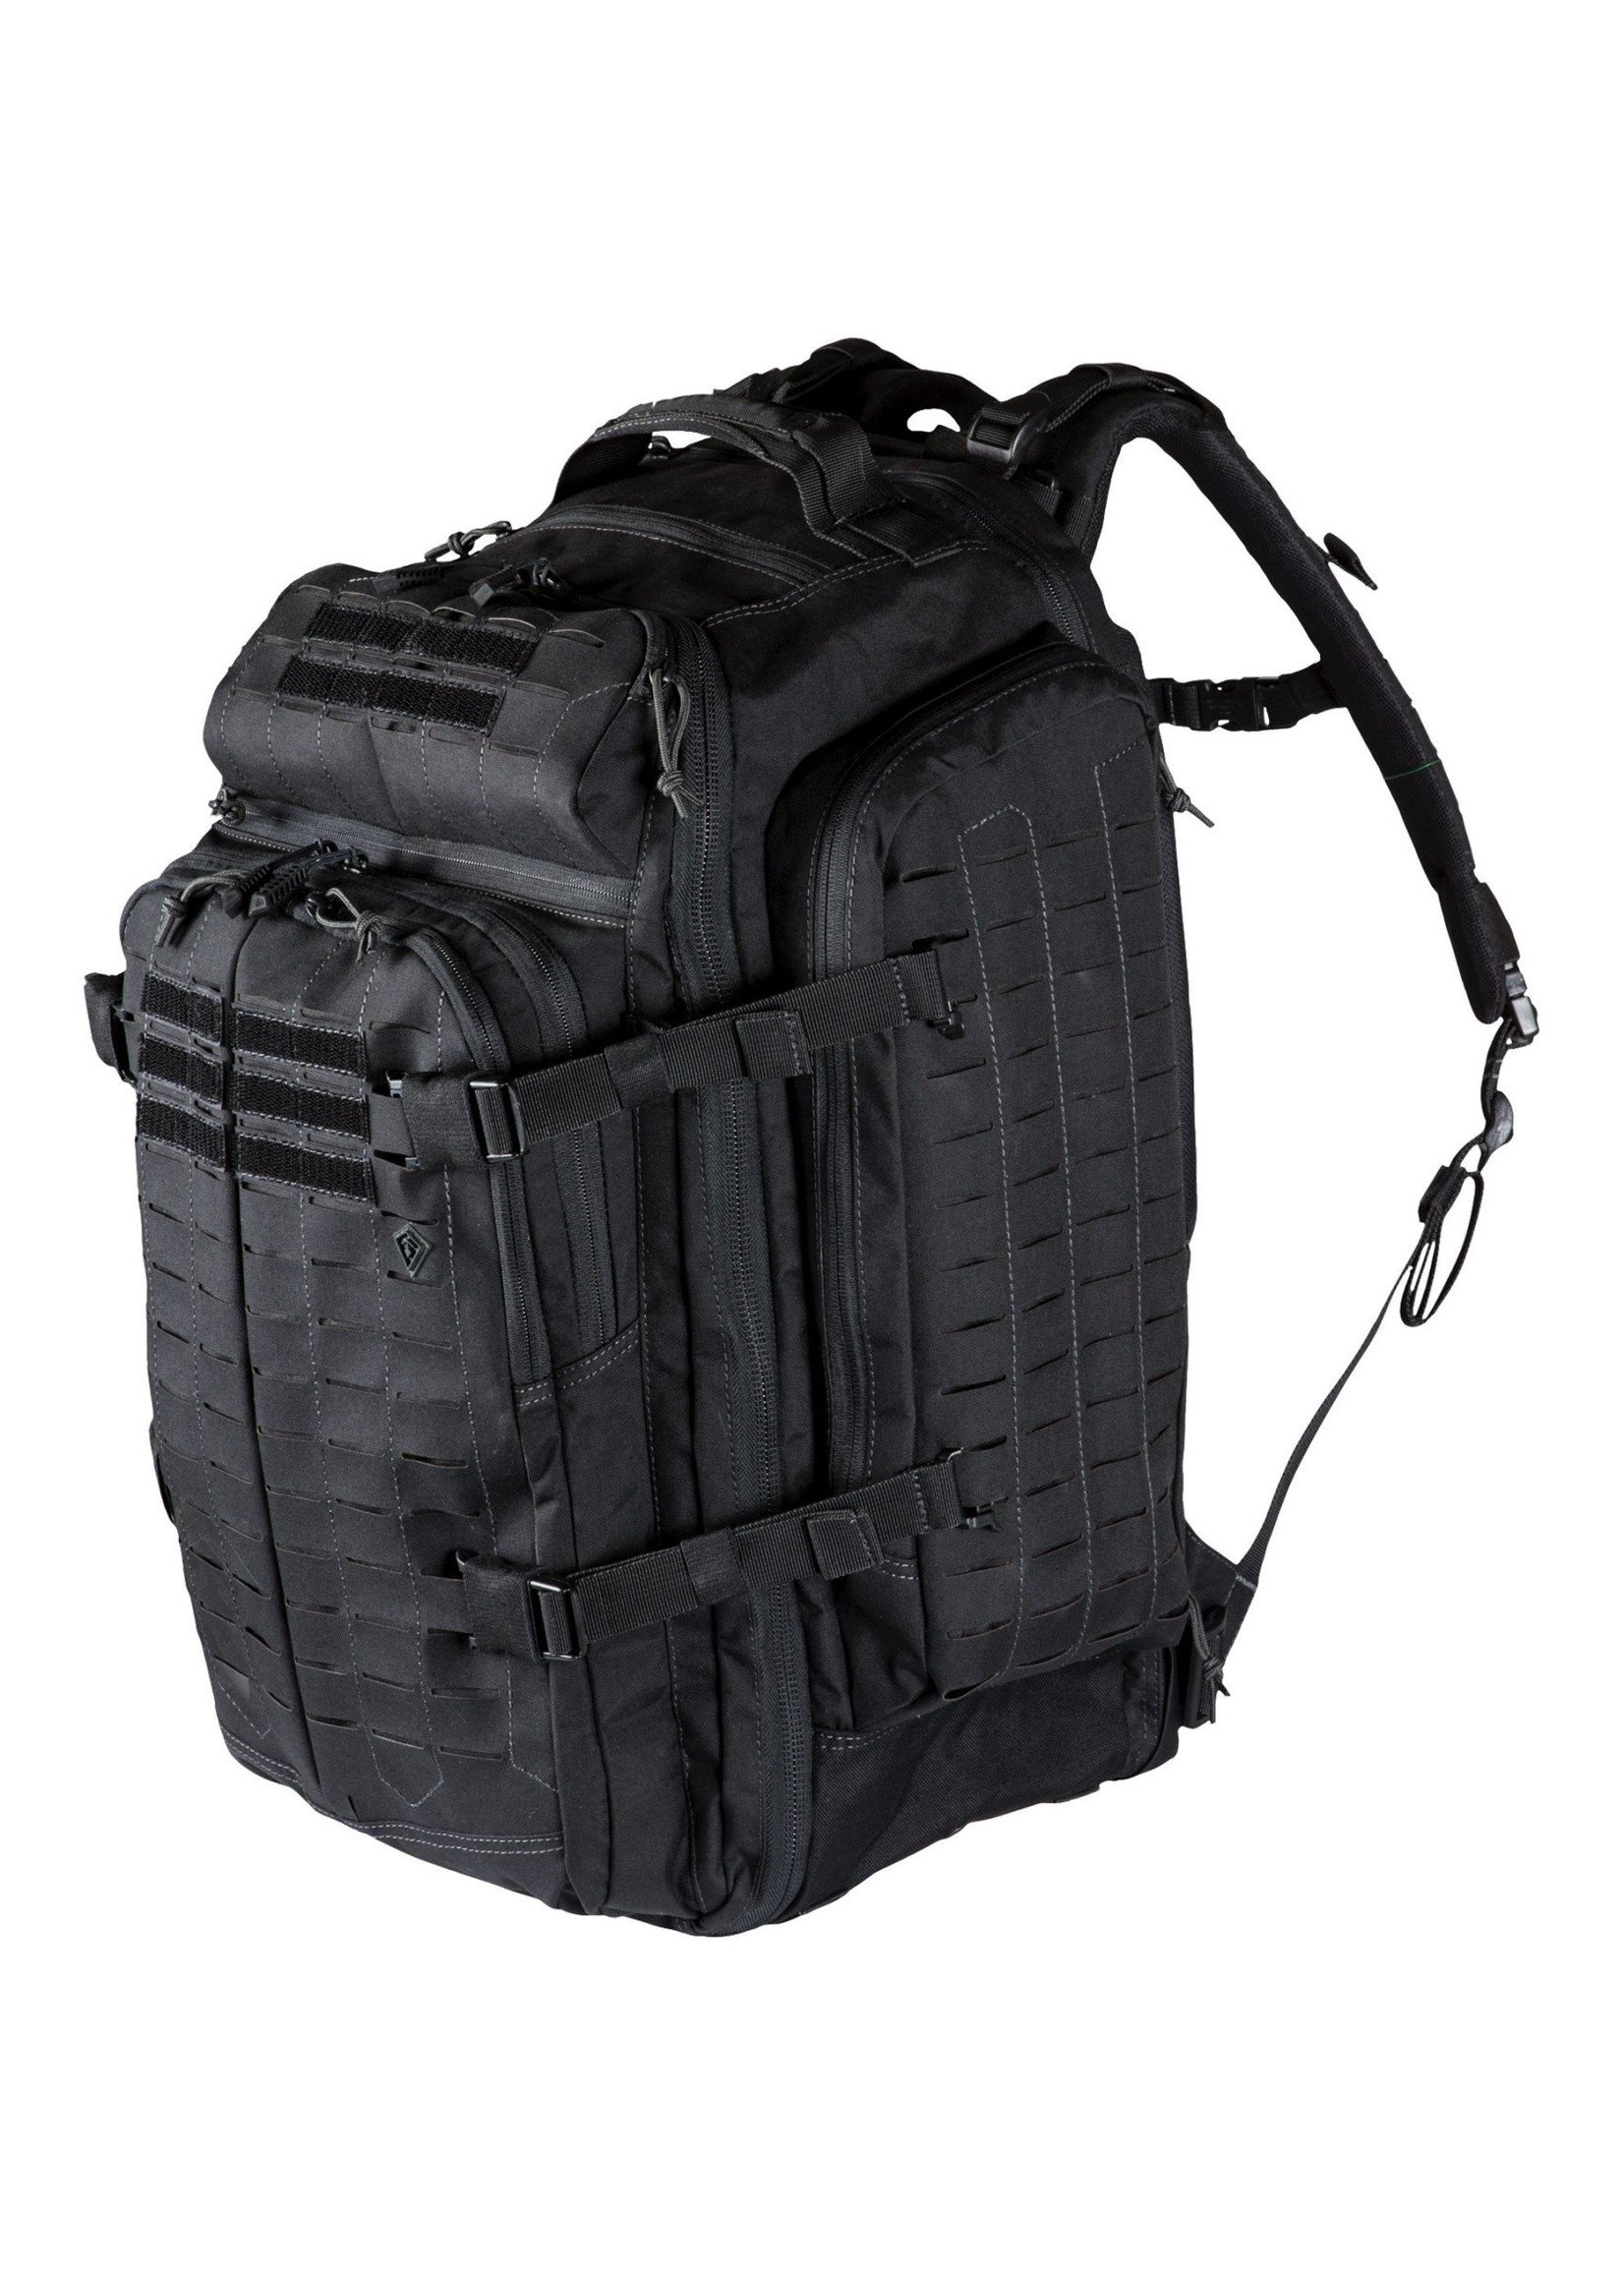 First Tactical First Tactical Tactix 3-Day Plus Backpack 62L